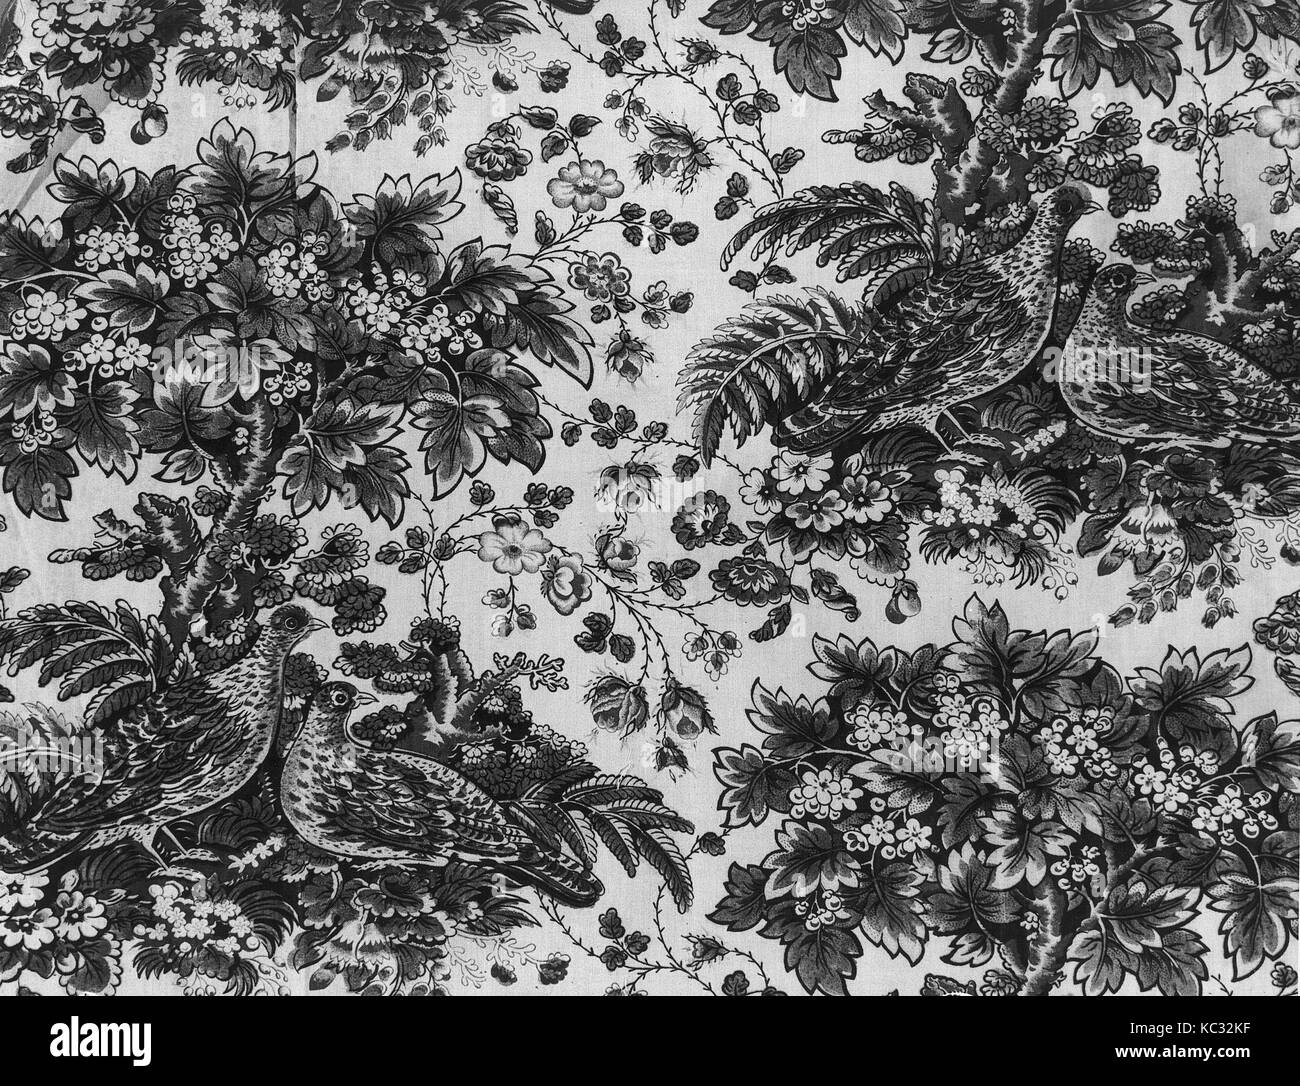 Section of bedskirt printed with game birds, 1830s, British or American, Cotton, L. 24 1/2 x W. 26 inches, Textiles-Printed Stock Photo